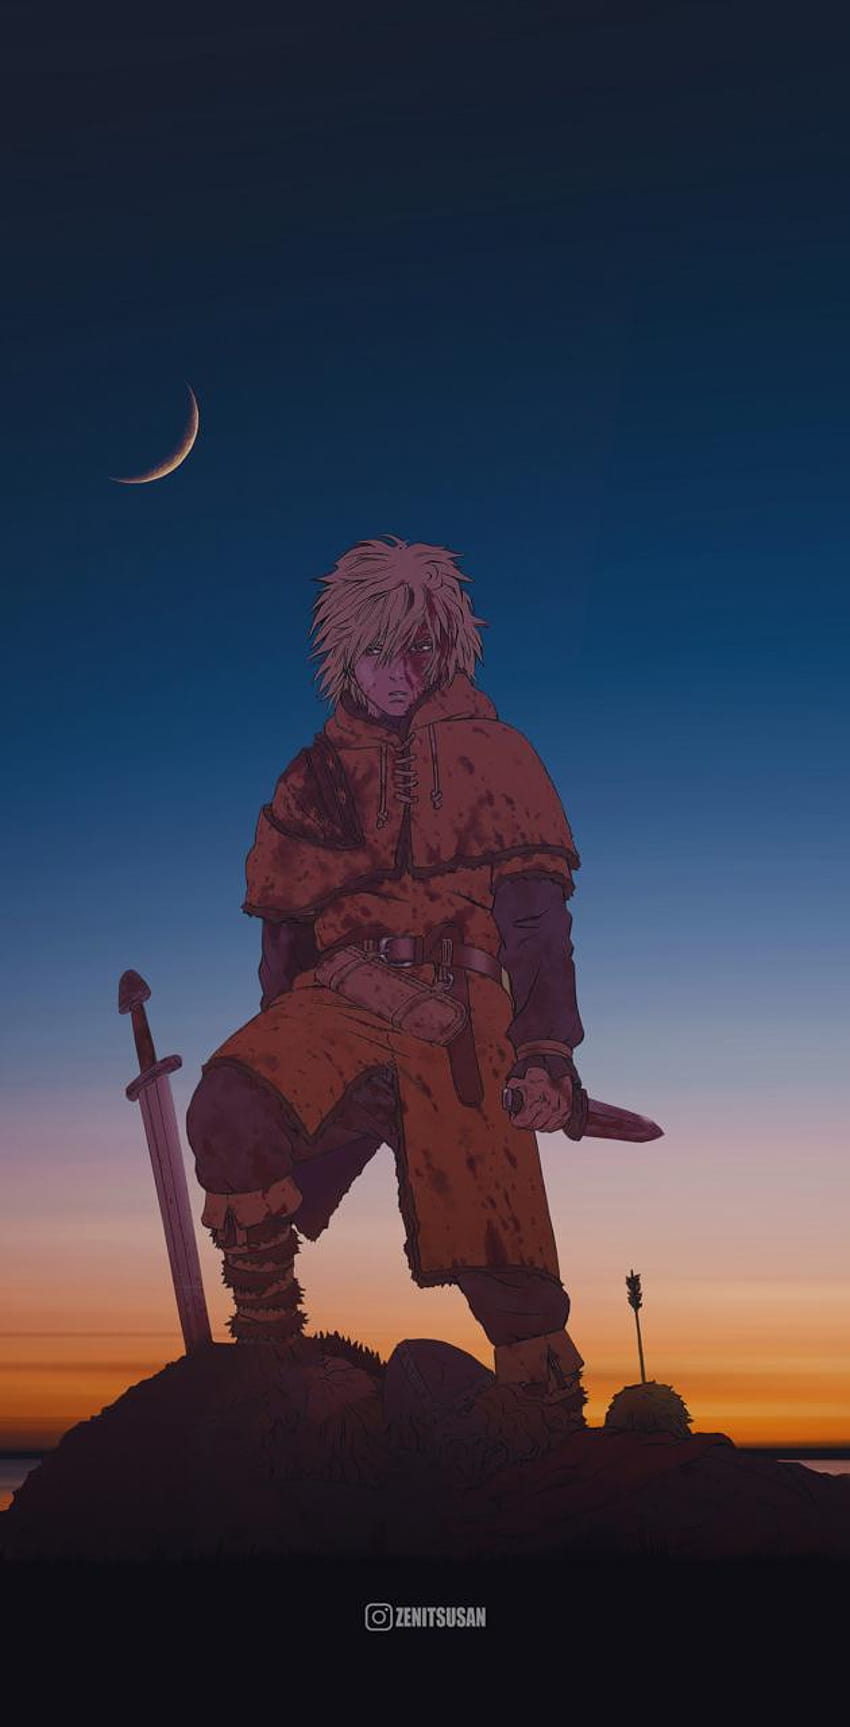 Vinland Saga iPhone Android backgrounds Vinland Saga Season 2 iPhone  cool backgrounds HD phone wallpaper  Peakpx